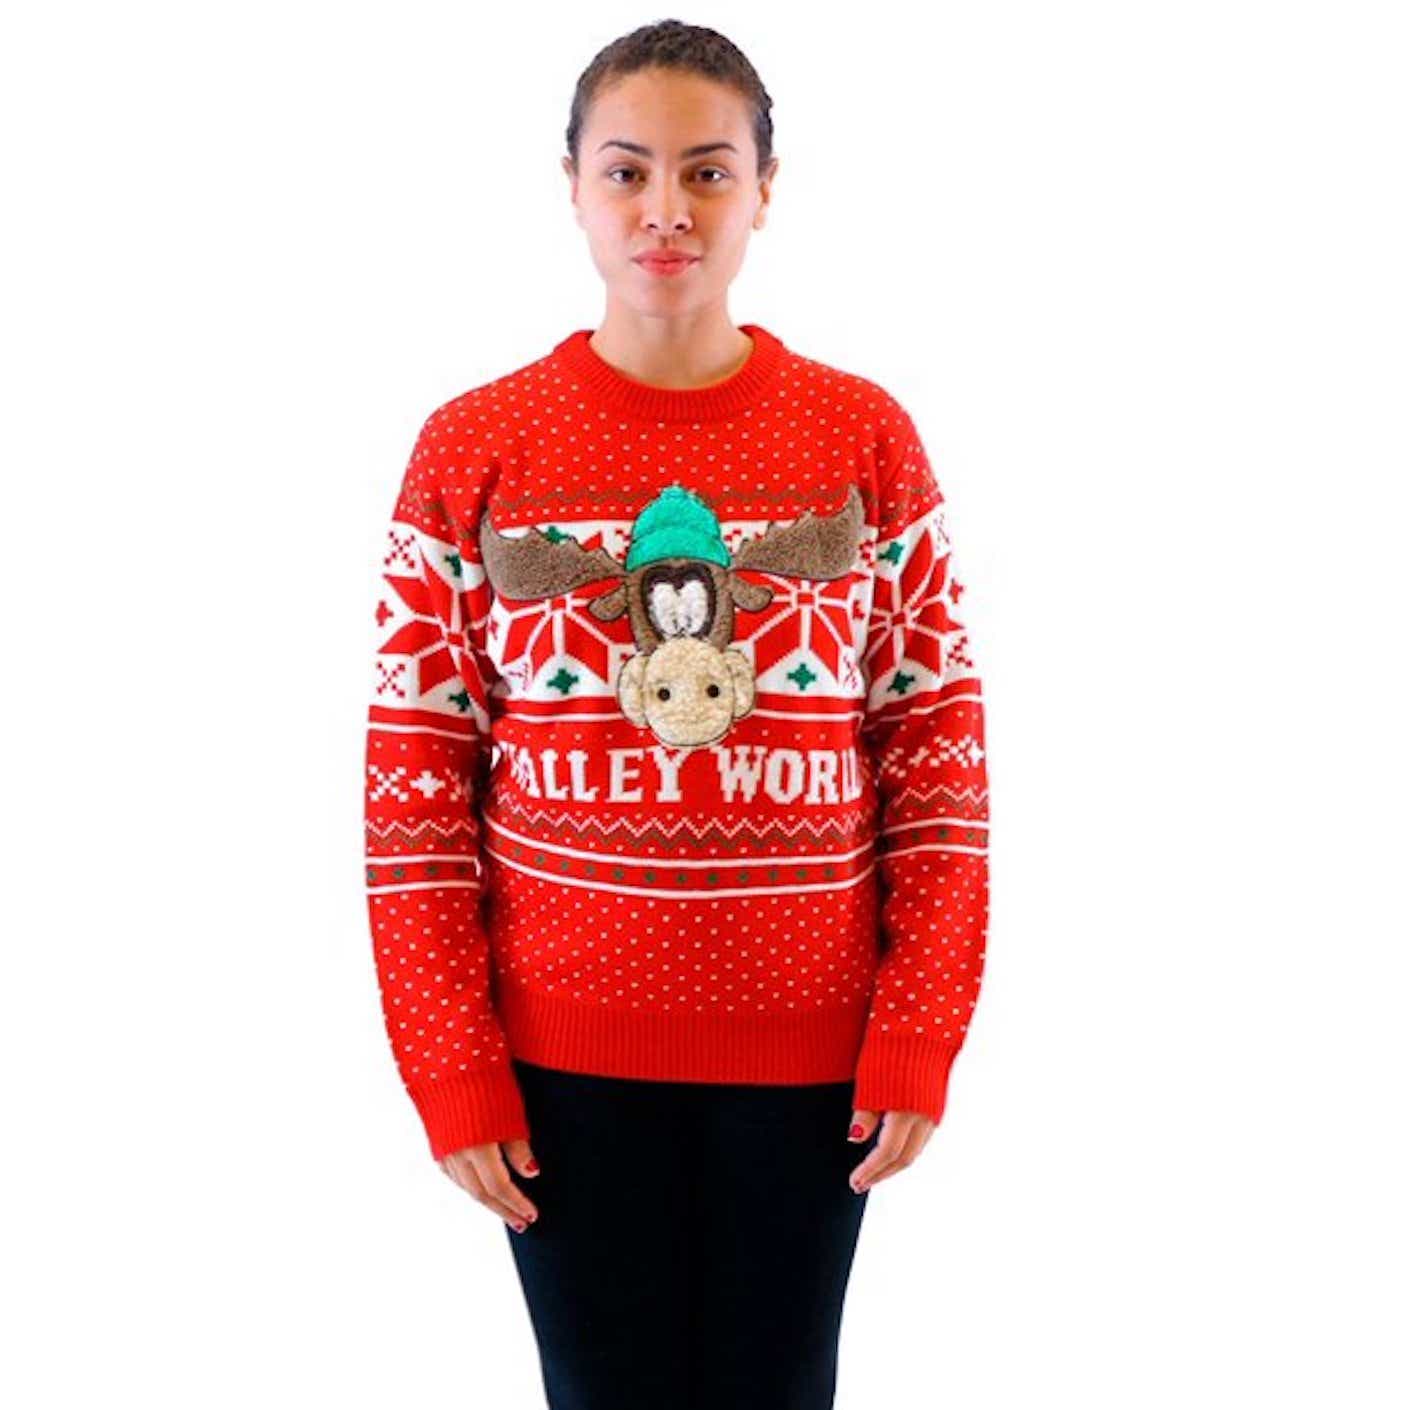 Funny ugly holiday sweater